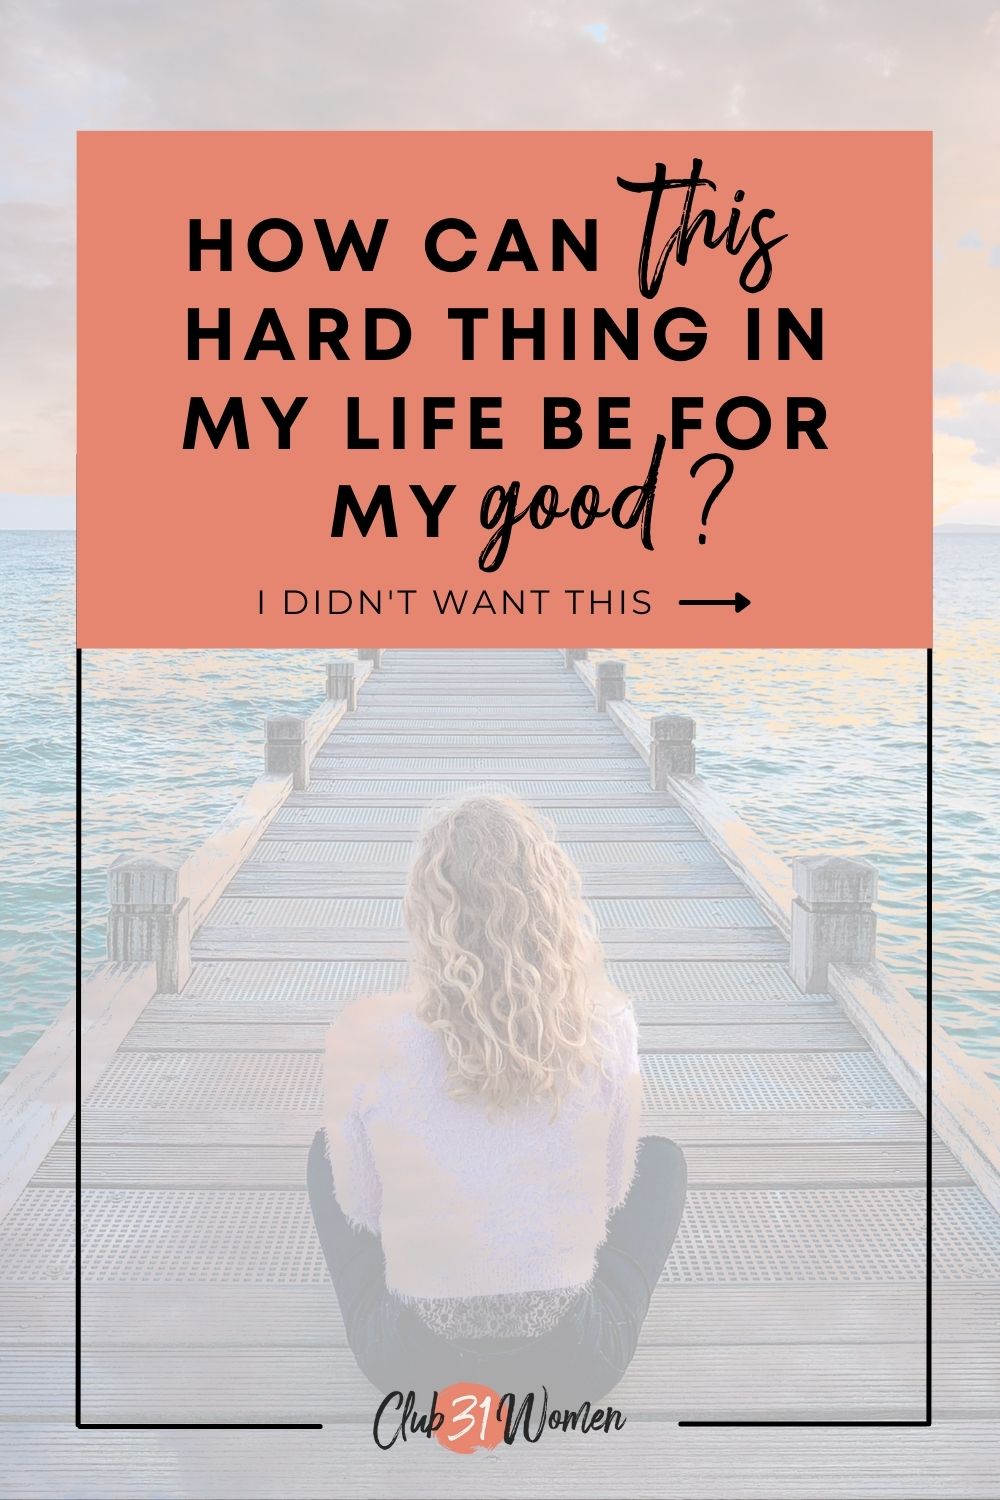 It can be so hard to trust God with a hard thing we are going through. But it's better to trust in Him than our own wisdom or strength. via @Club31Women